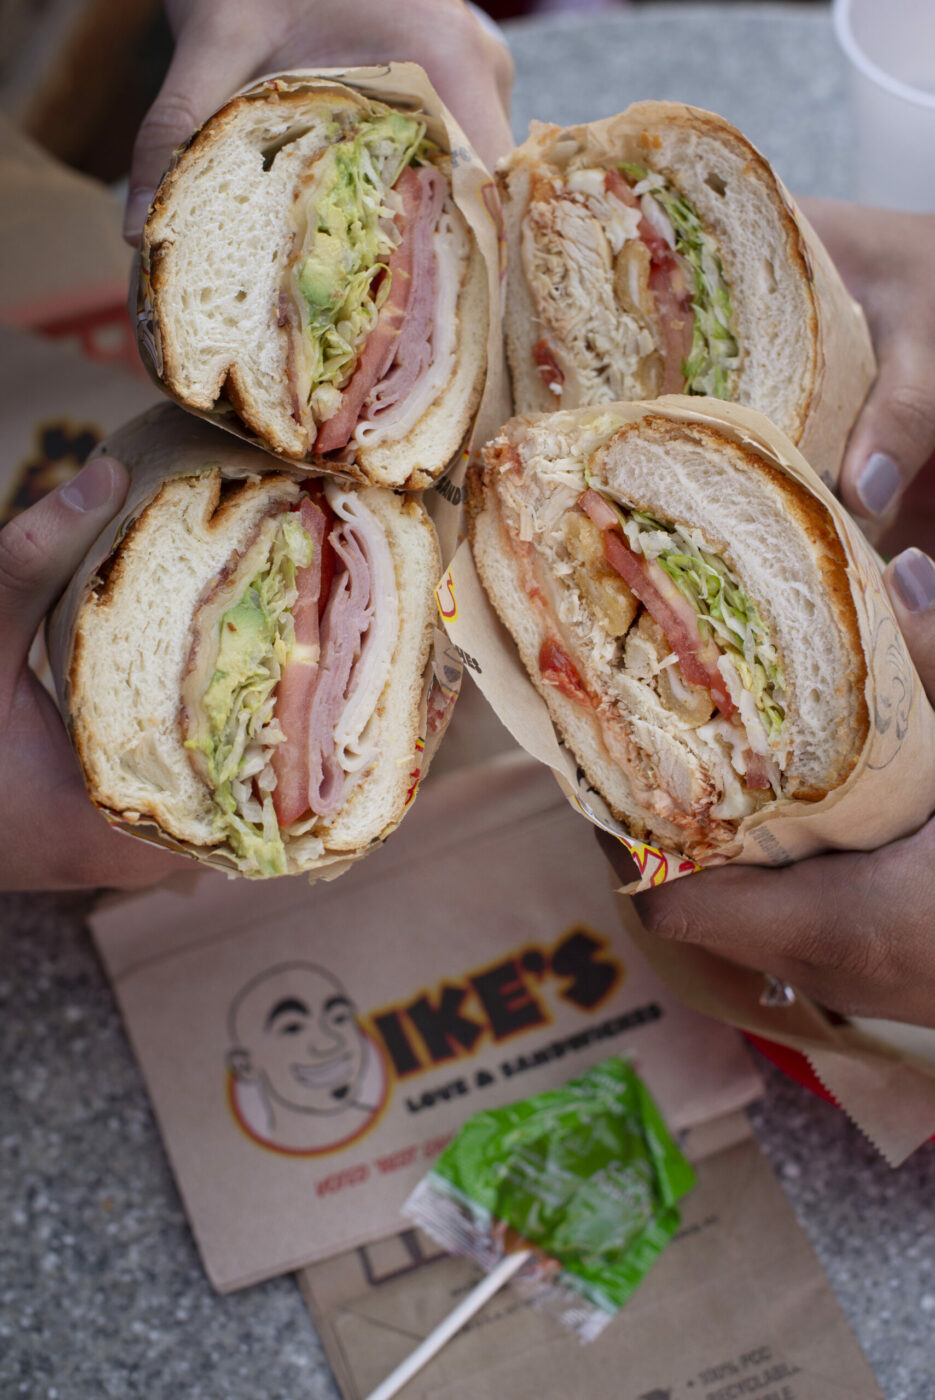 A couple prepares to eat the Lincecum sandwich, left, made with avocado, bacon, ham, havarti and turkey and the Rum Rum sandwich made with halal chicken, marinara and provolone cheese at Ike's Place in Santa Rosa, California. September 6, 2018 (Photo: Erik Castro/for The Press Democrat)